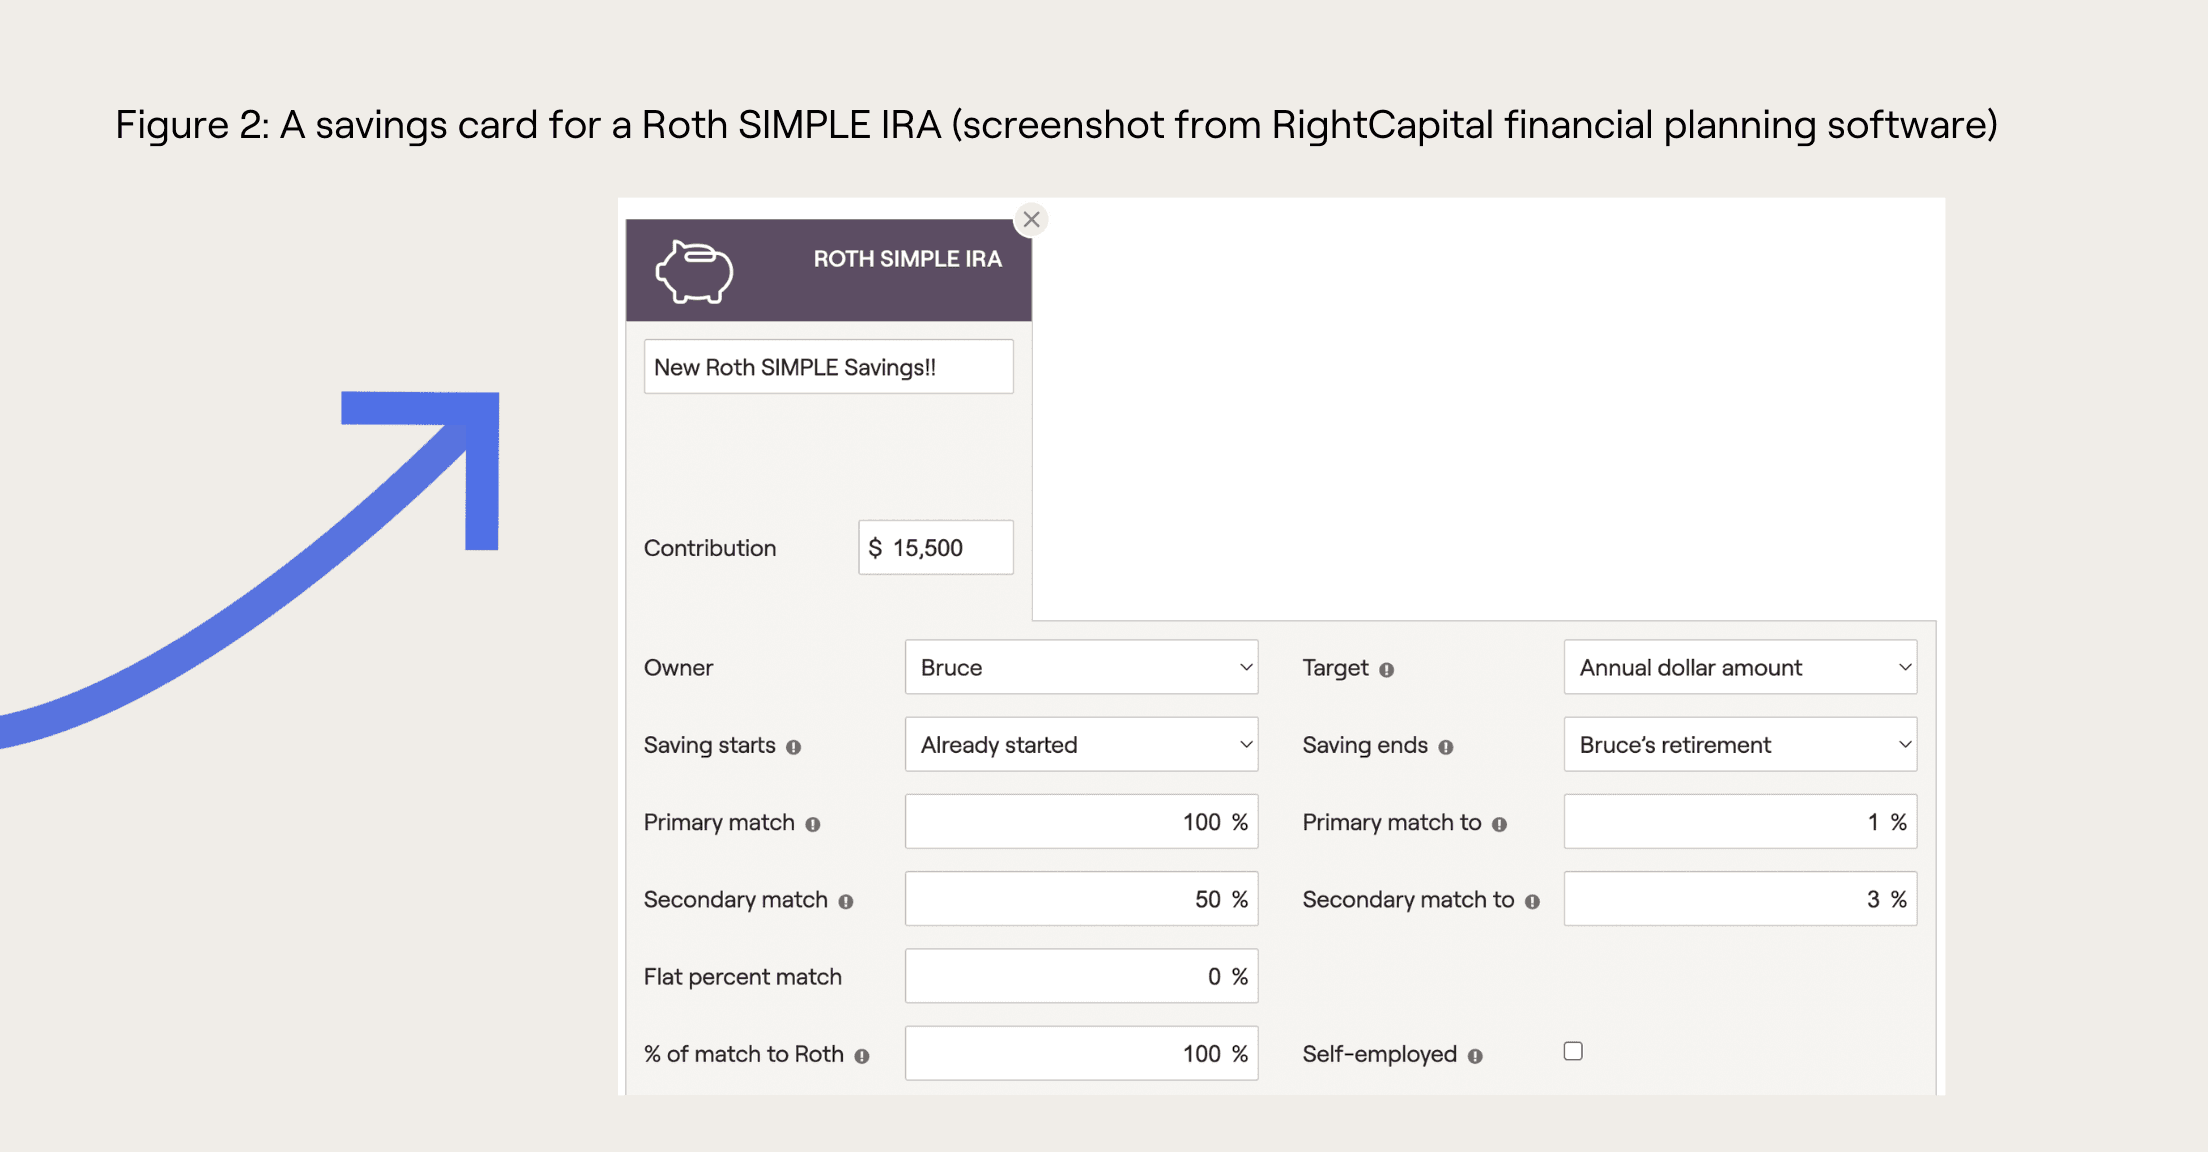 A savings card for a Roth SIMPLE IRA (screenshot from RightCapital financial planning software)